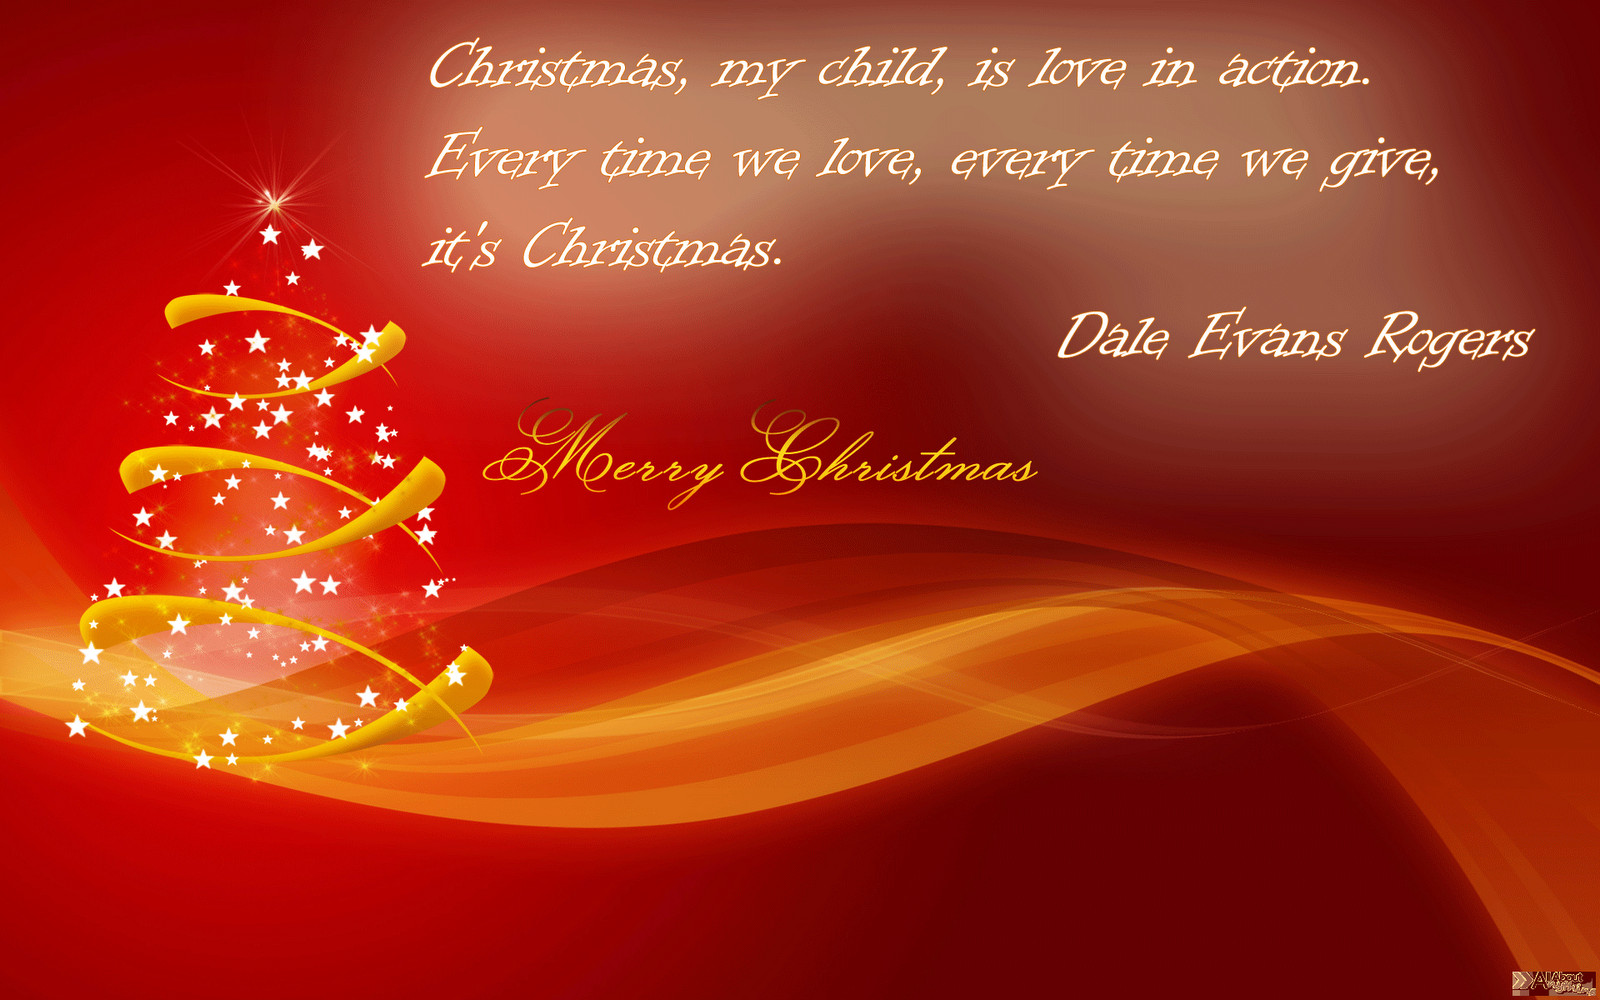 Quote For Christmas
 Christmas Text Messages Christmas Quotes in Cards